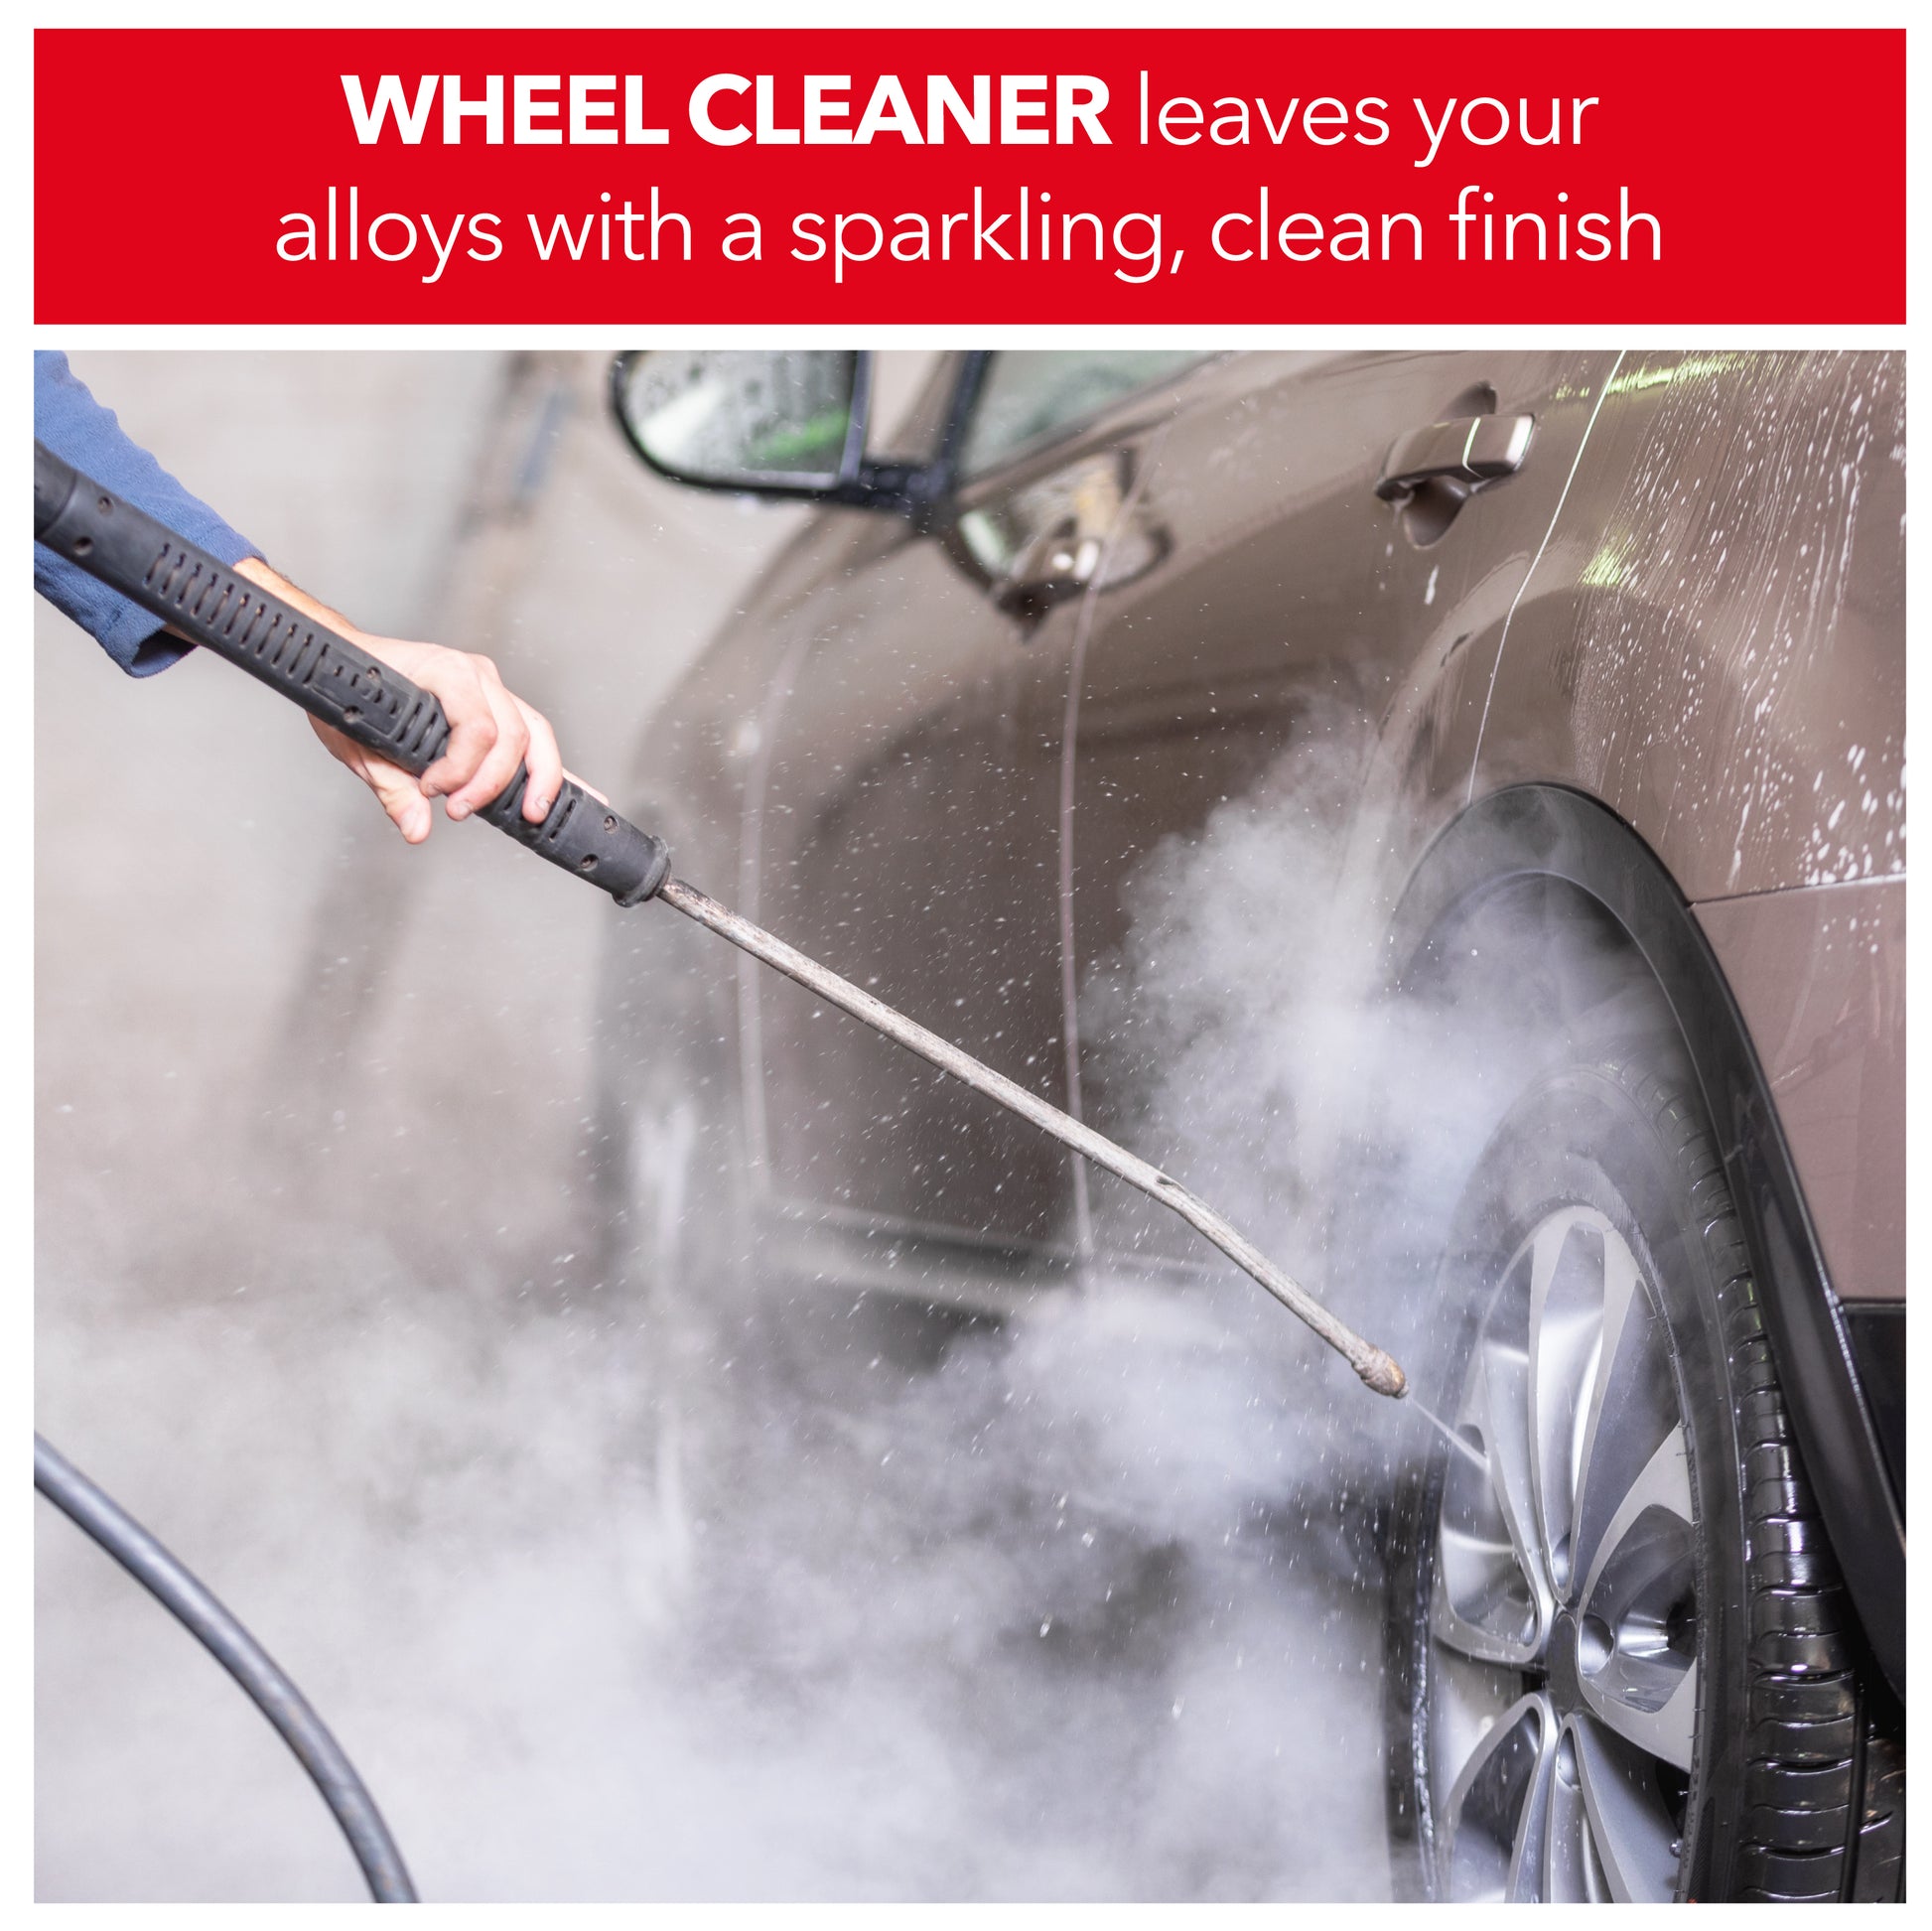 wheel cleaner leaves your alloys with a sparkling clean finish